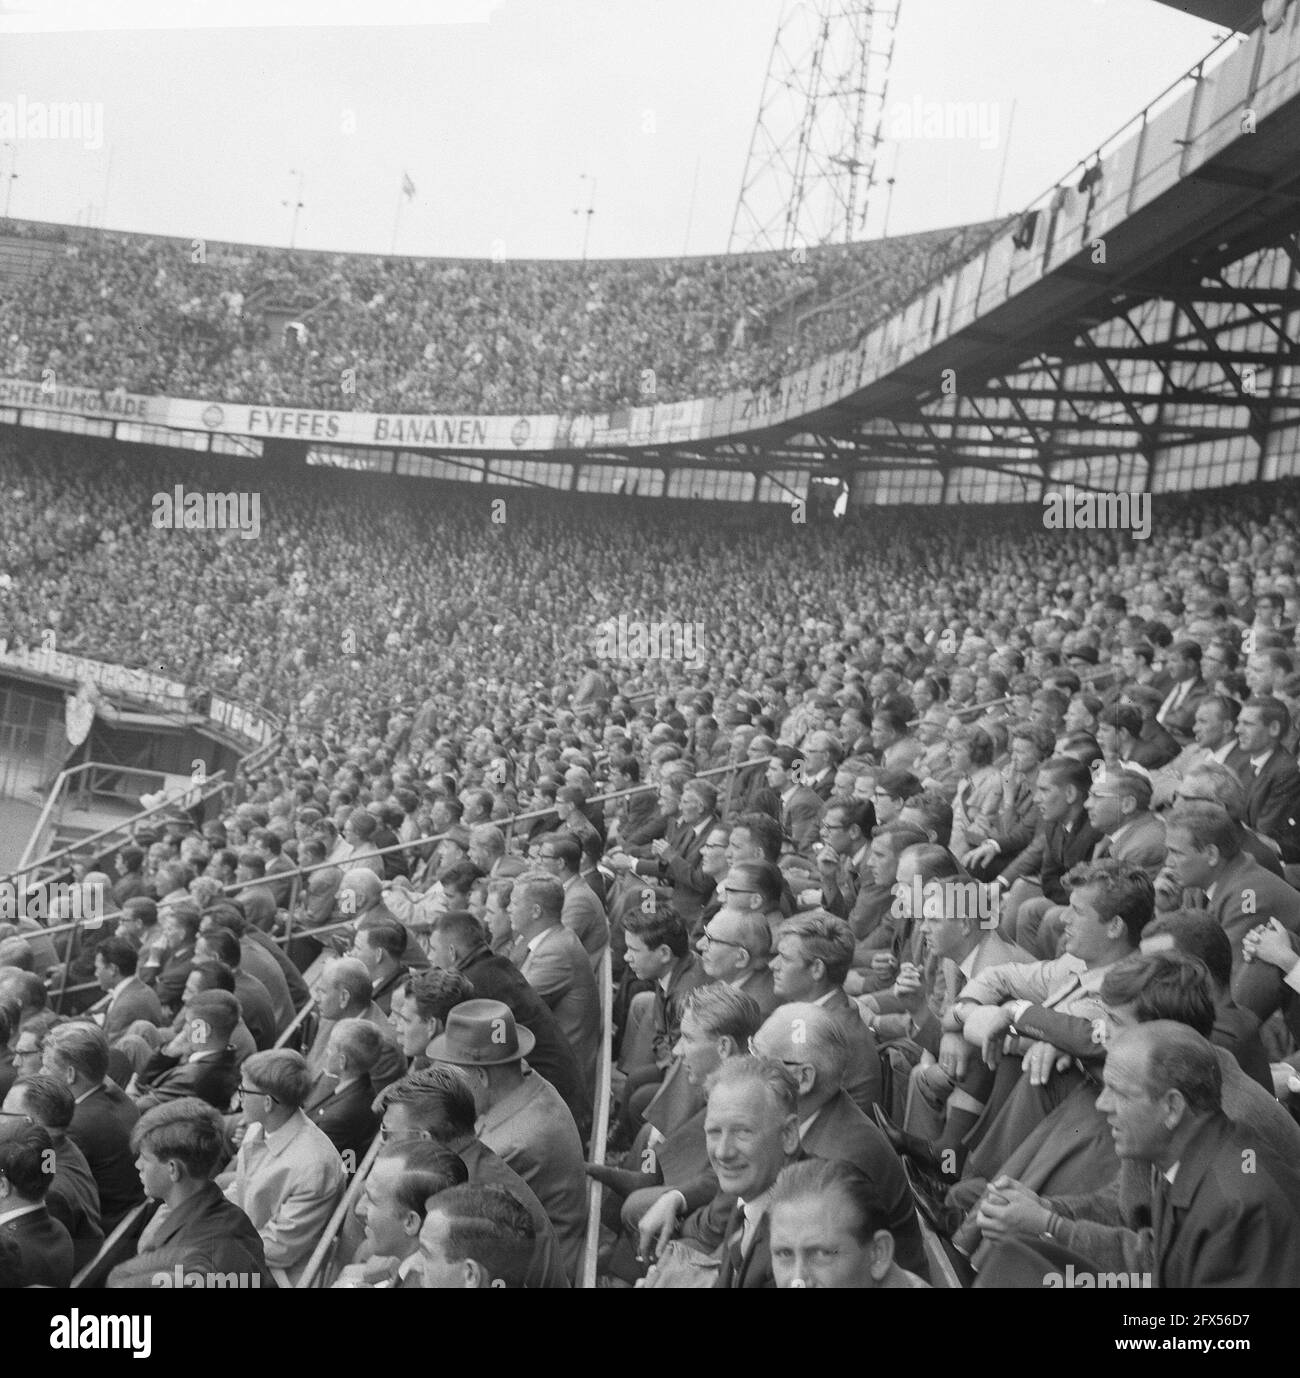 Feyenoord against PSV, huge crowd in stadium, August 22, 1965, crowd, sports, stadiums, soccer, The Netherlands, 20th century press agency photo, news to remember, documentary, historic photography 1945-1990, visual stories, human history of the Twentieth Century, capturing moments in time Stock Photo